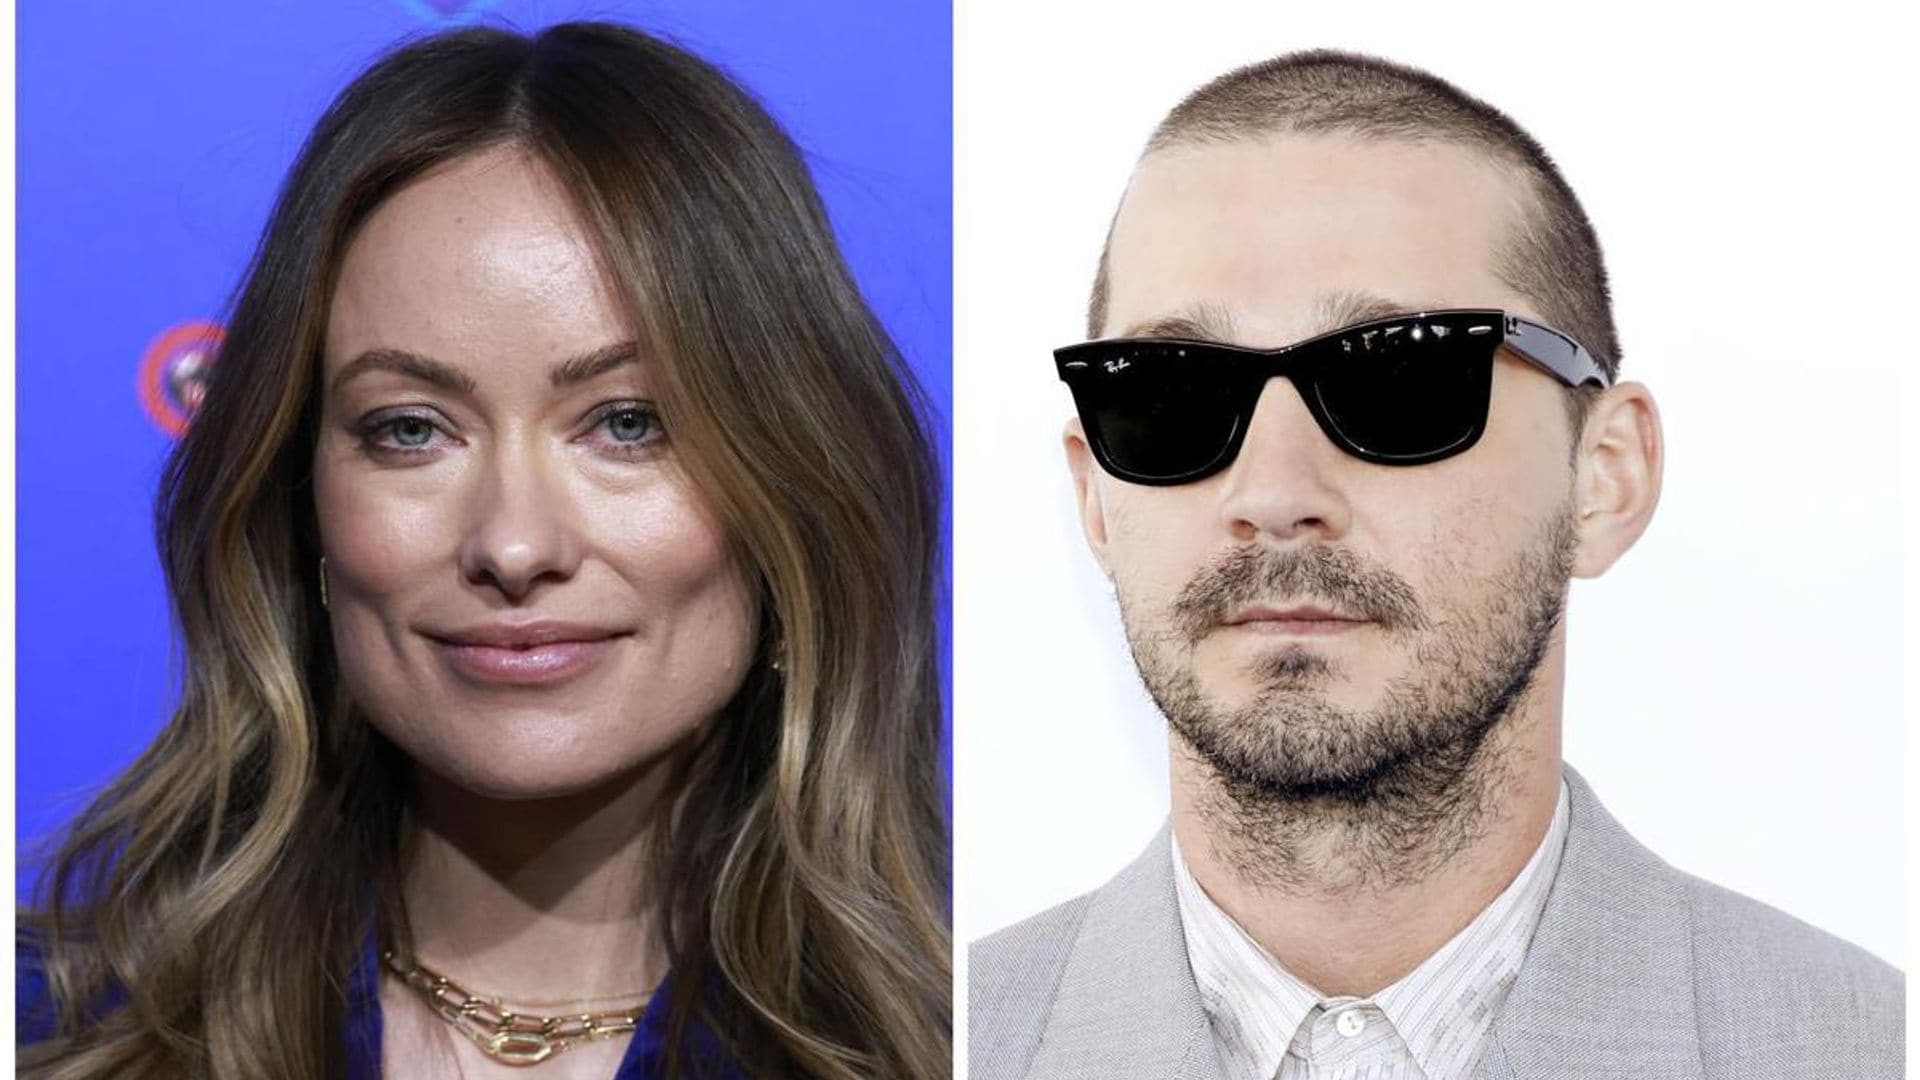 Olivia Wilde shares why she fired Shia LaBeouf and replaced him with Harry Styles